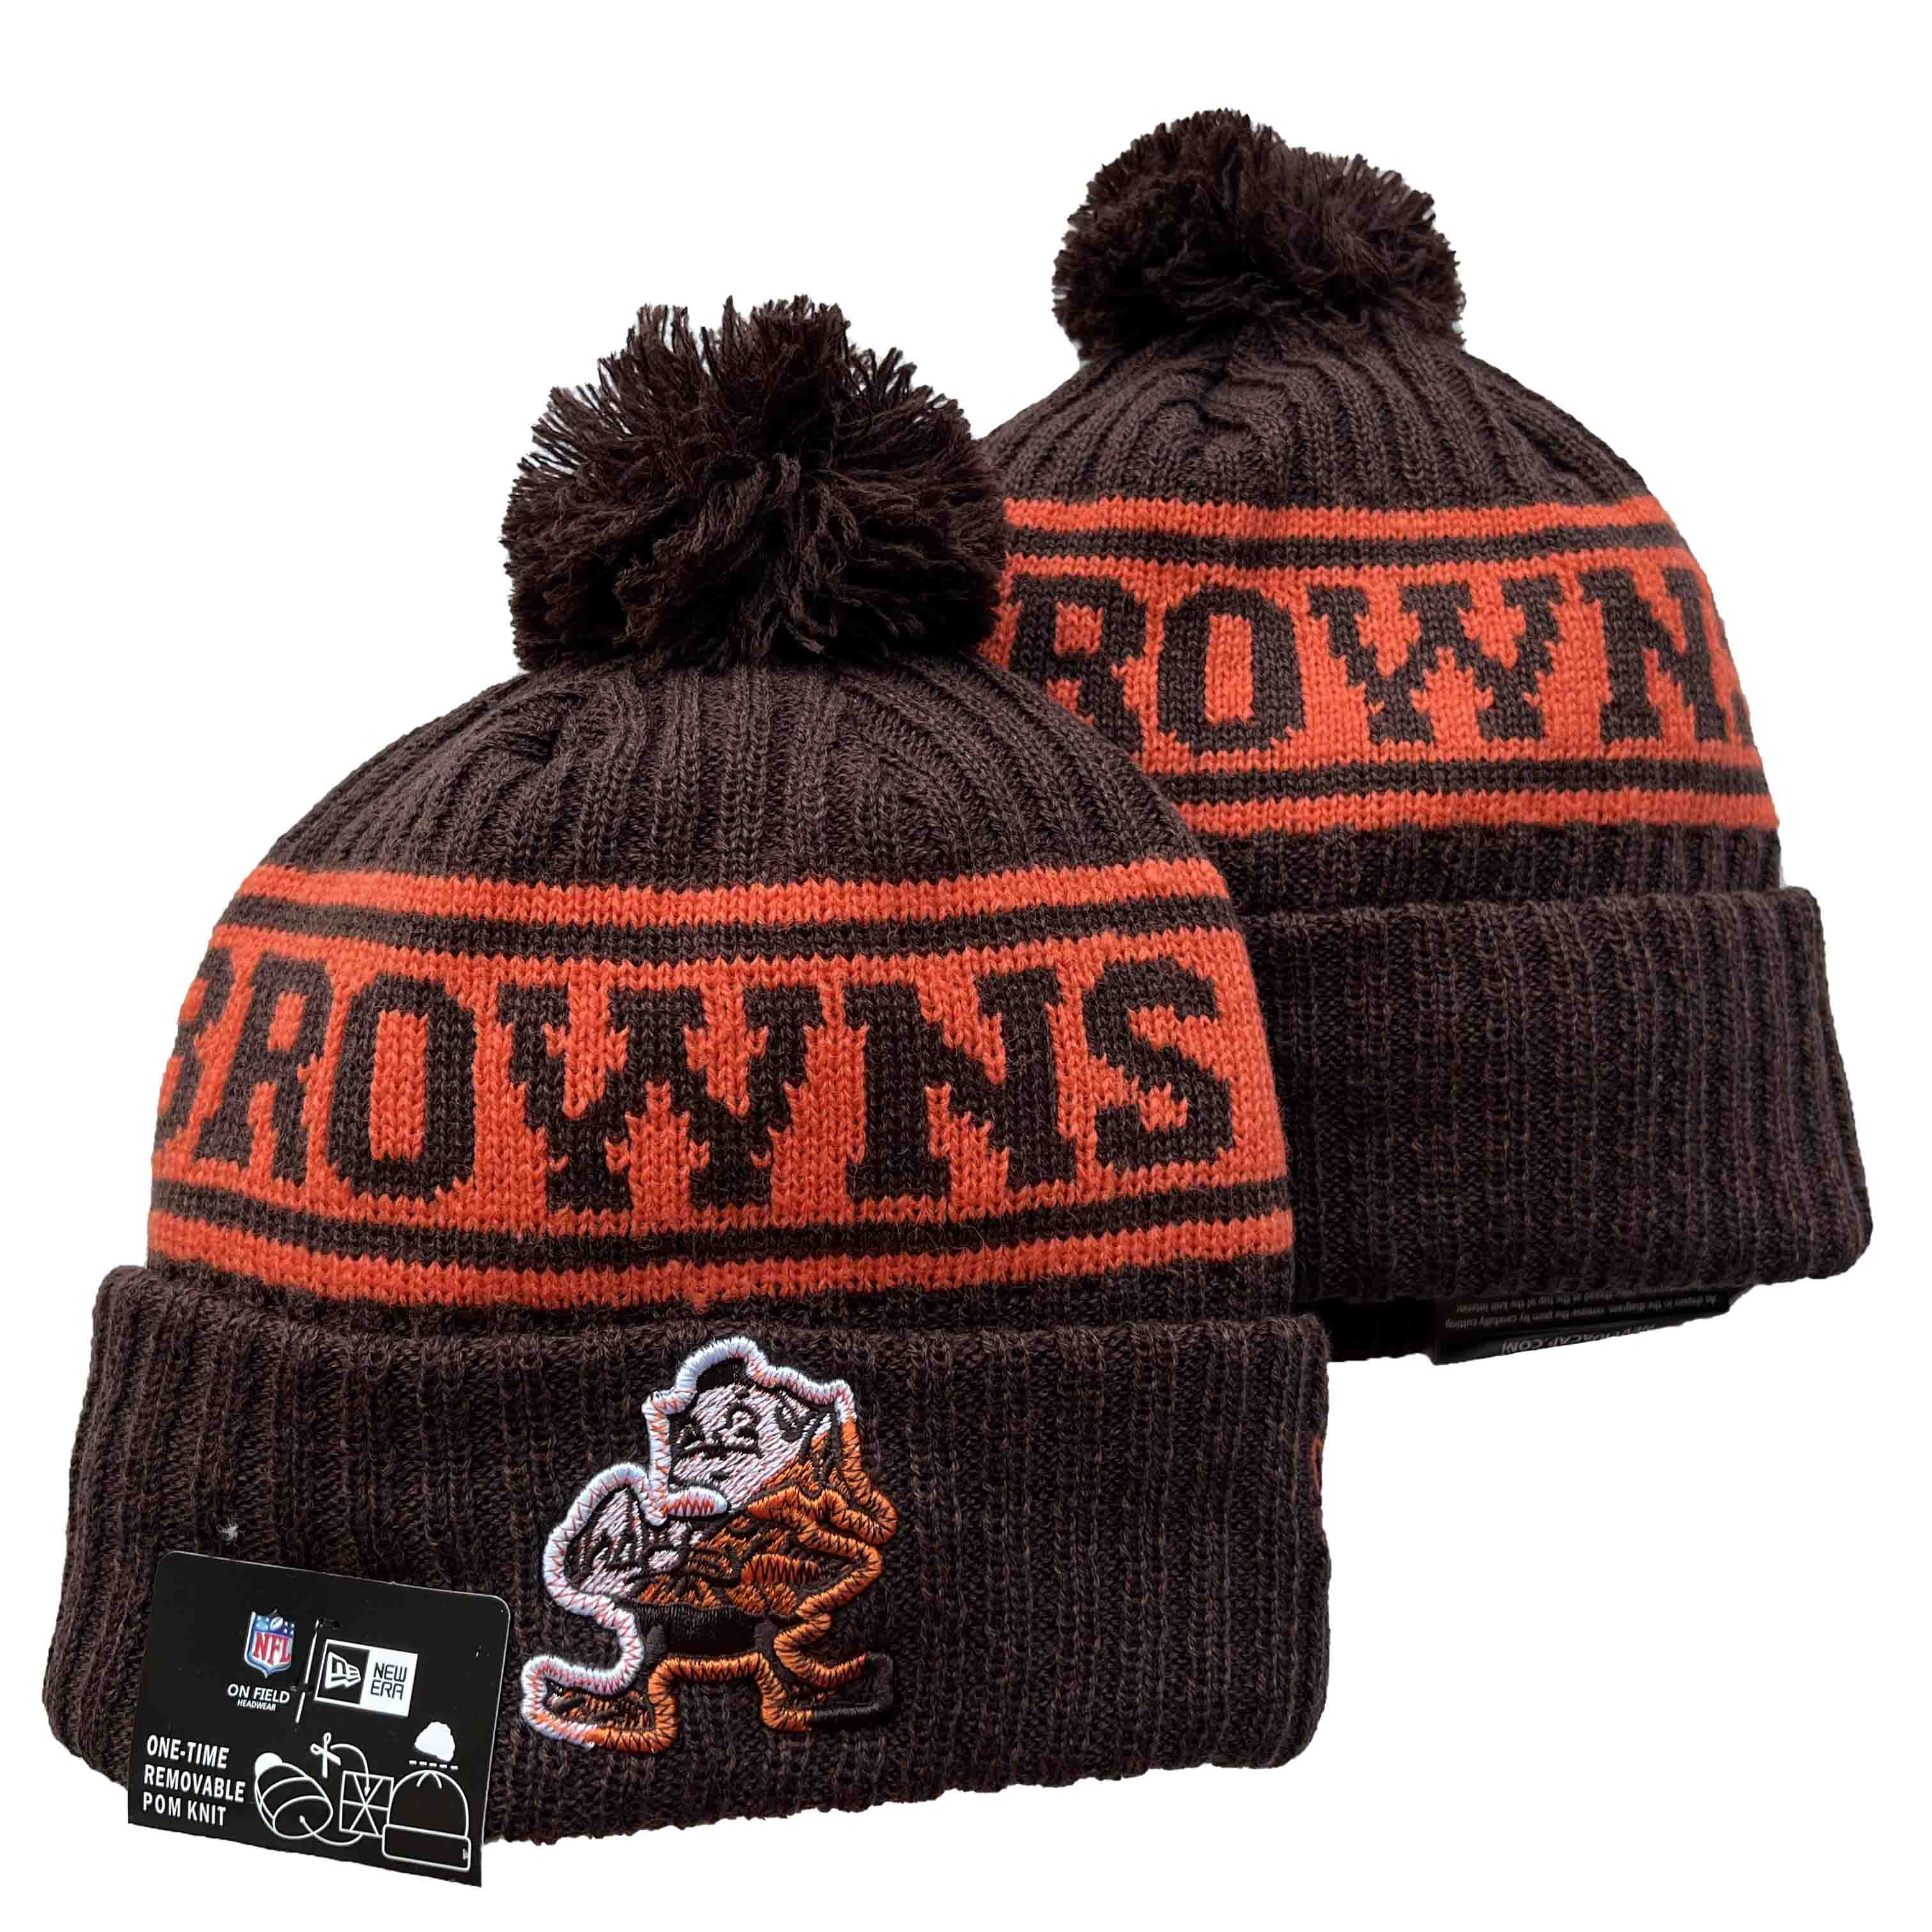 NFL Cleveland Browns Beanies Knit Hats-YD1307